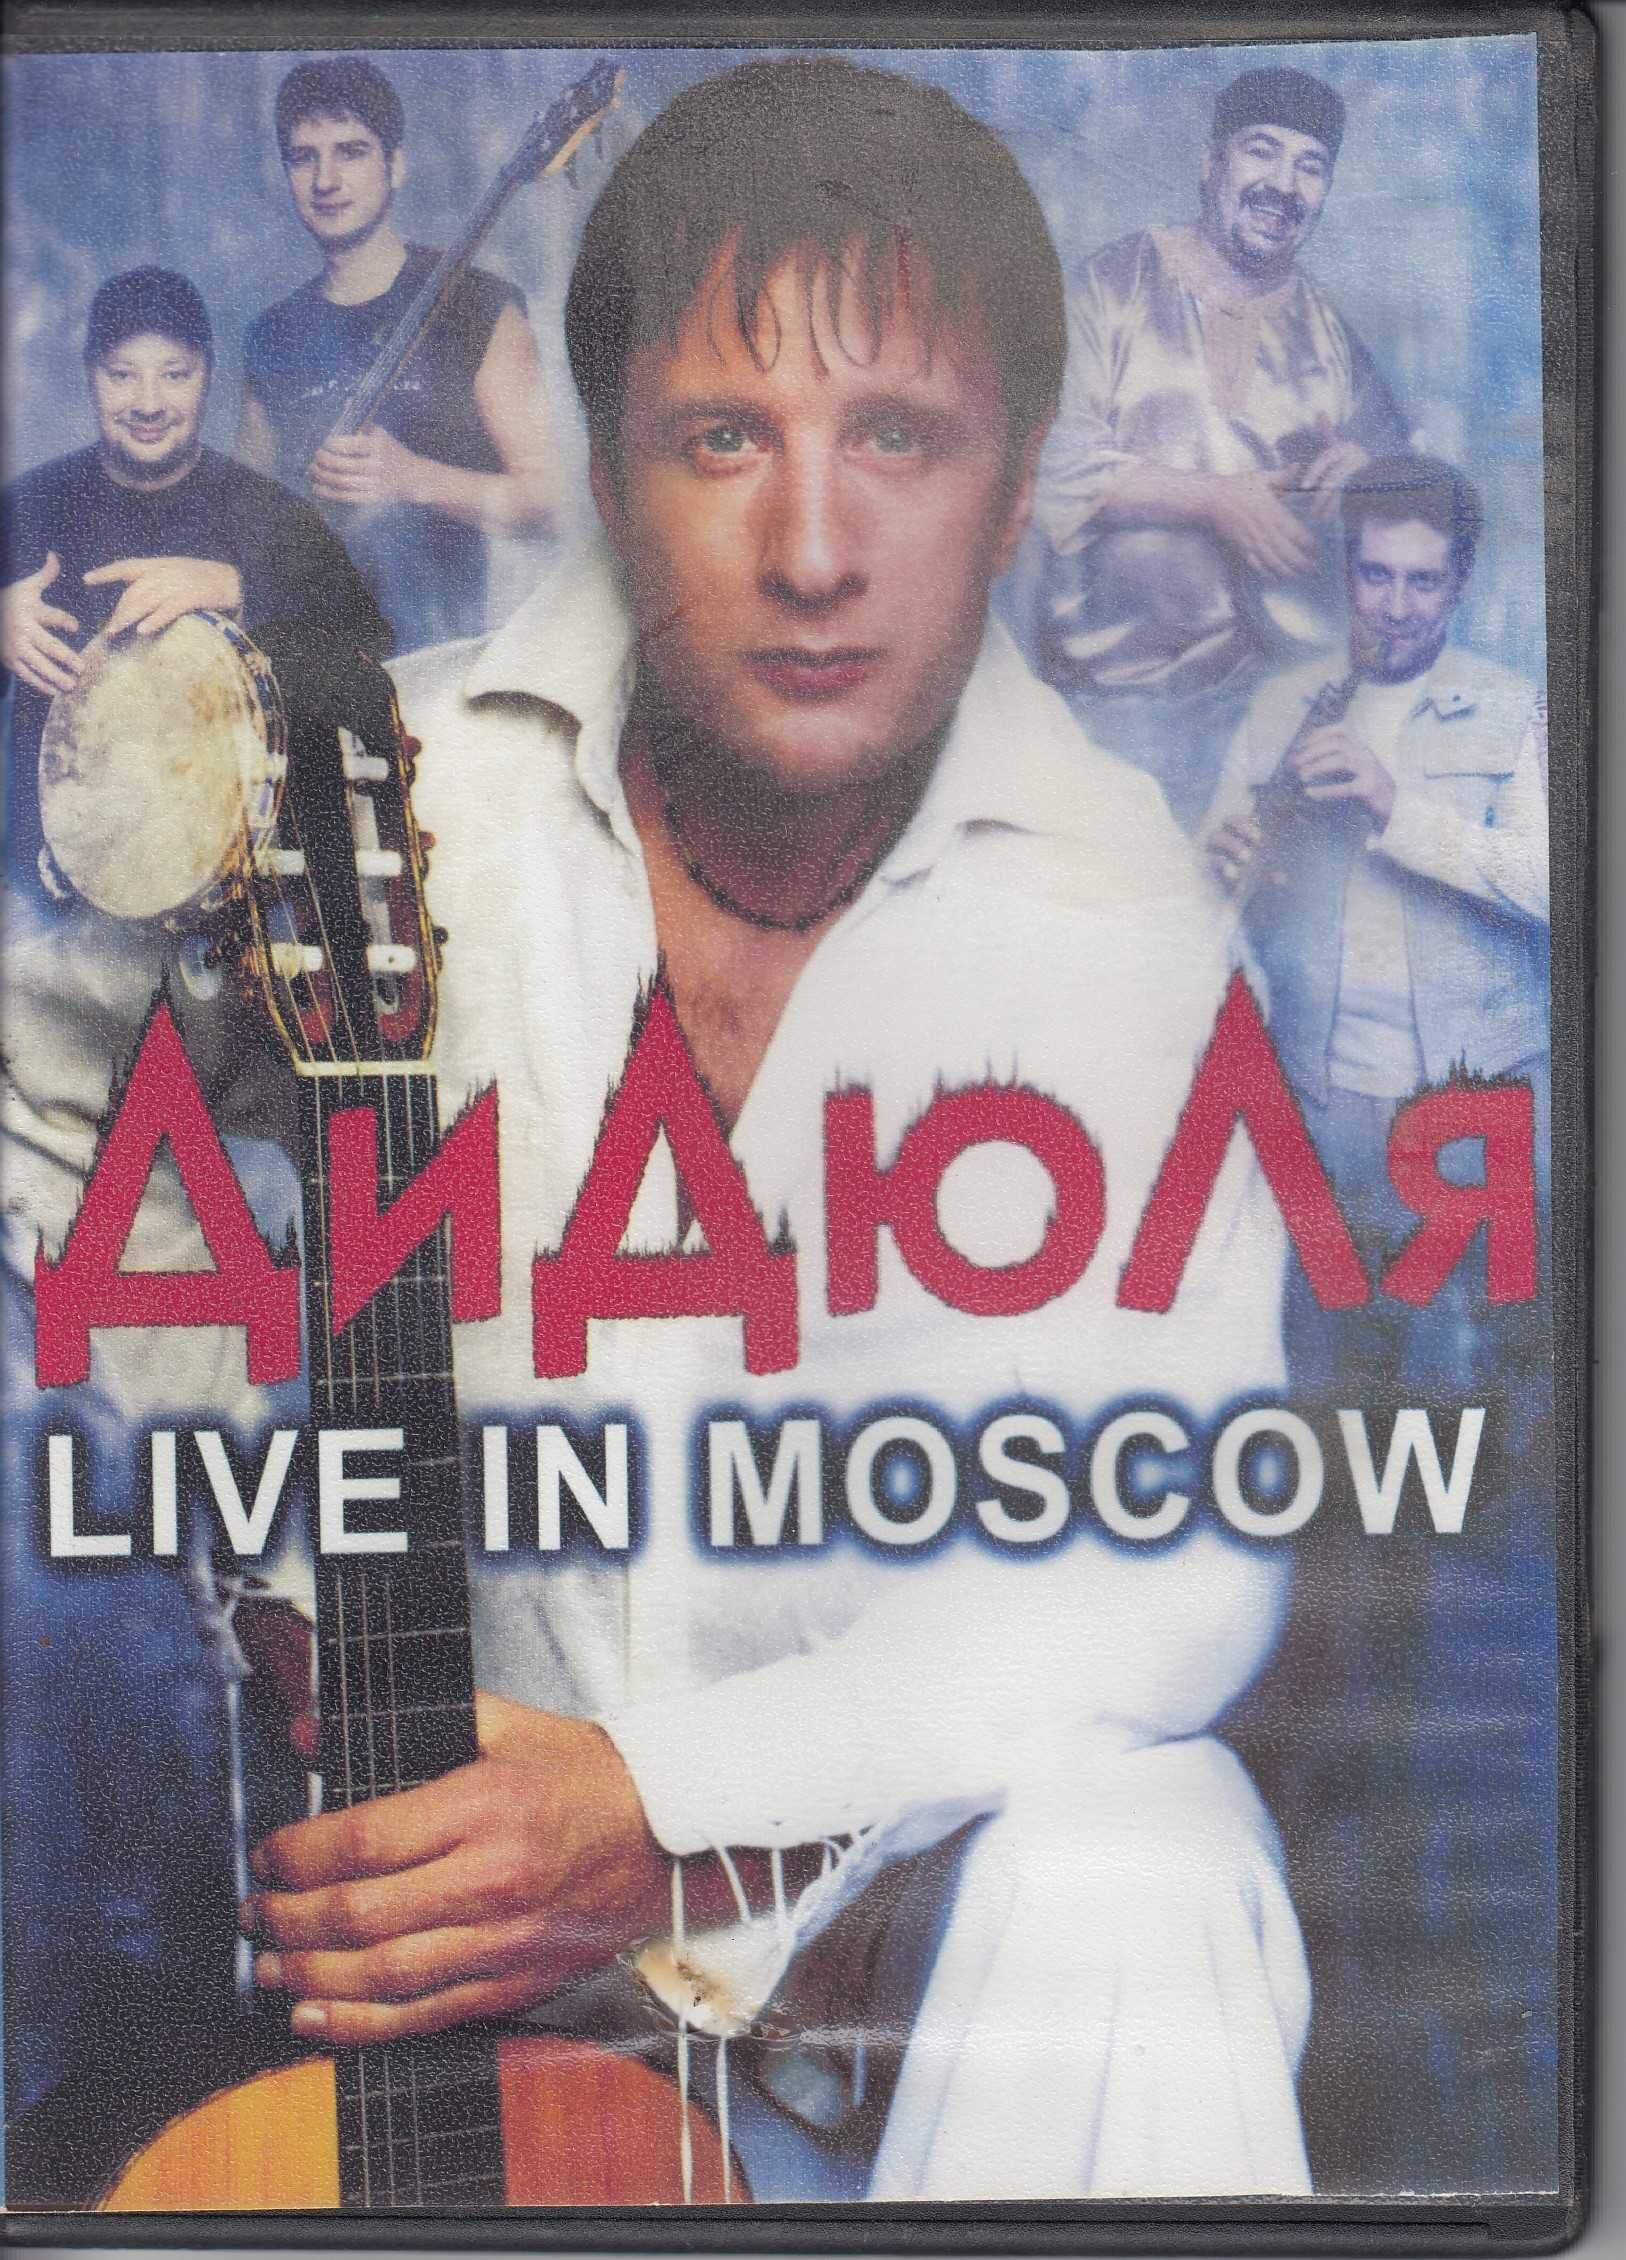 Дидюля Live in moscow